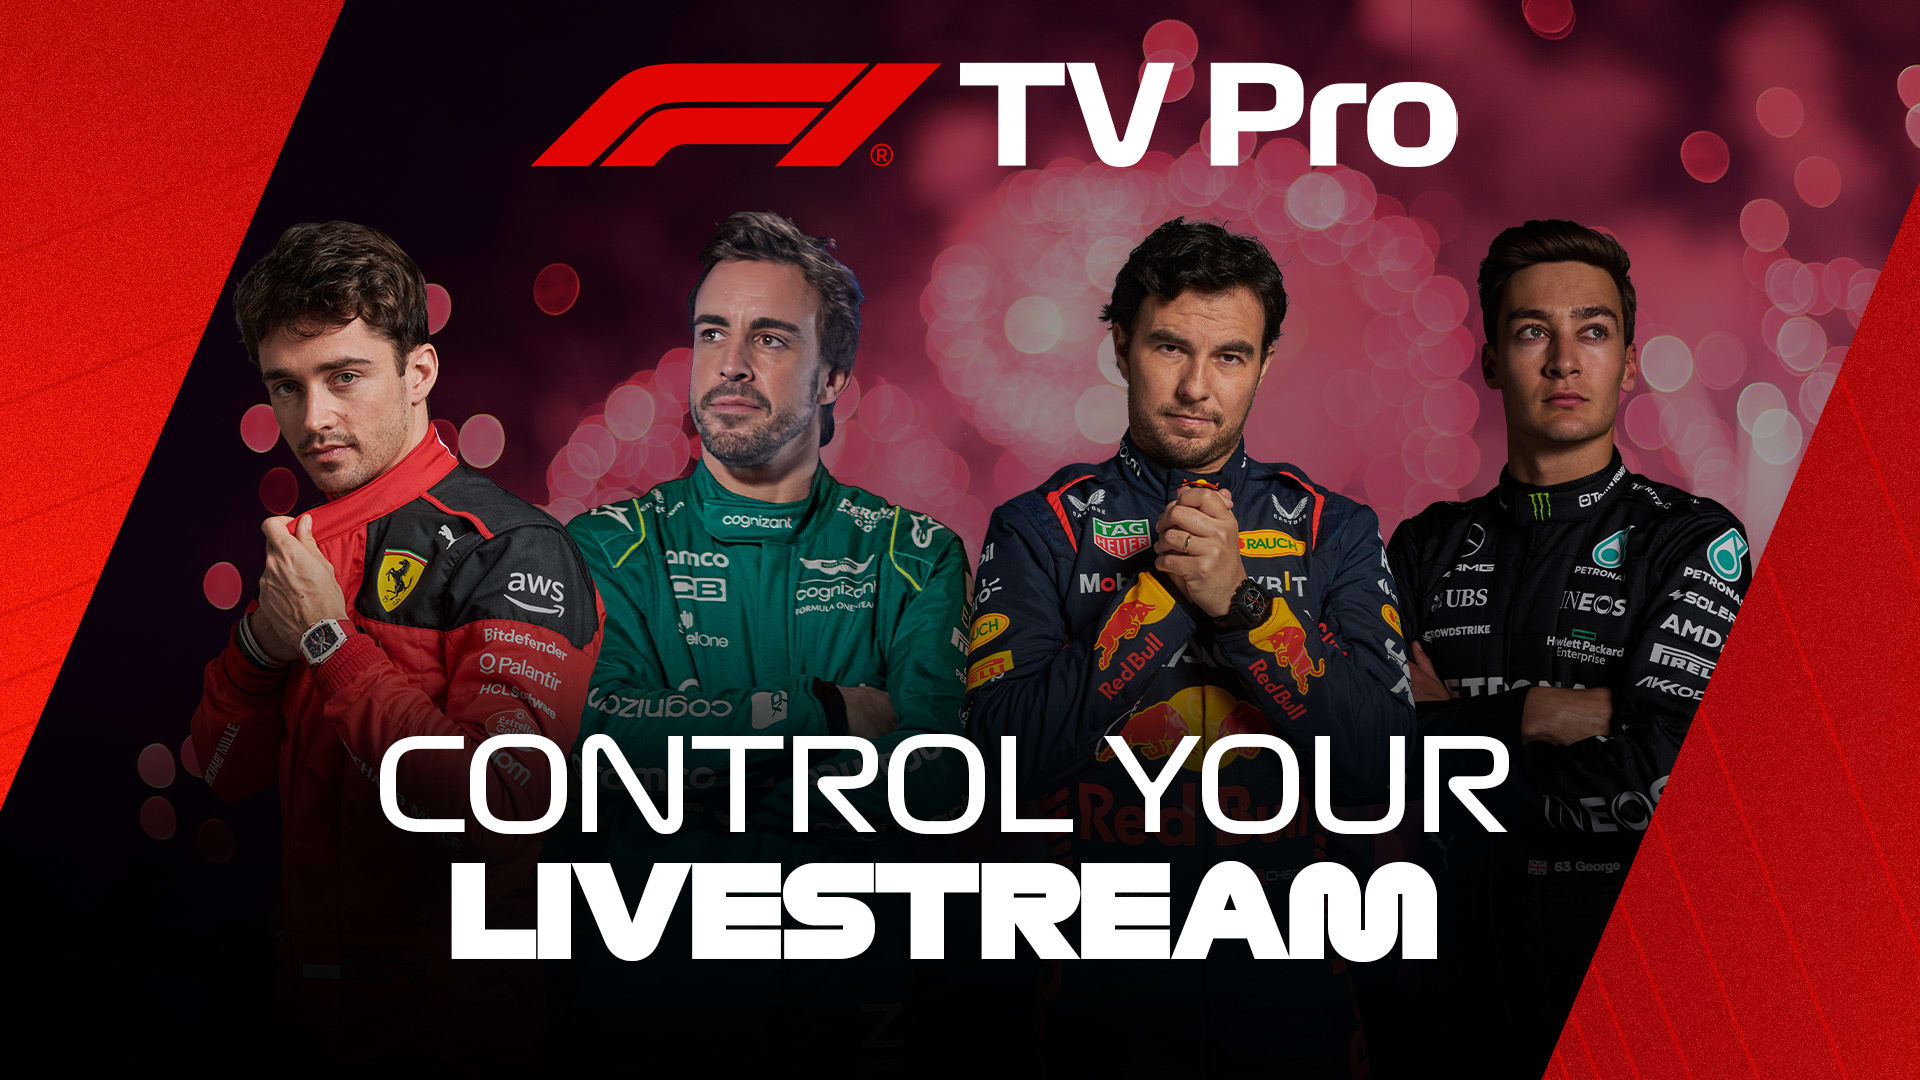 f1 official stream